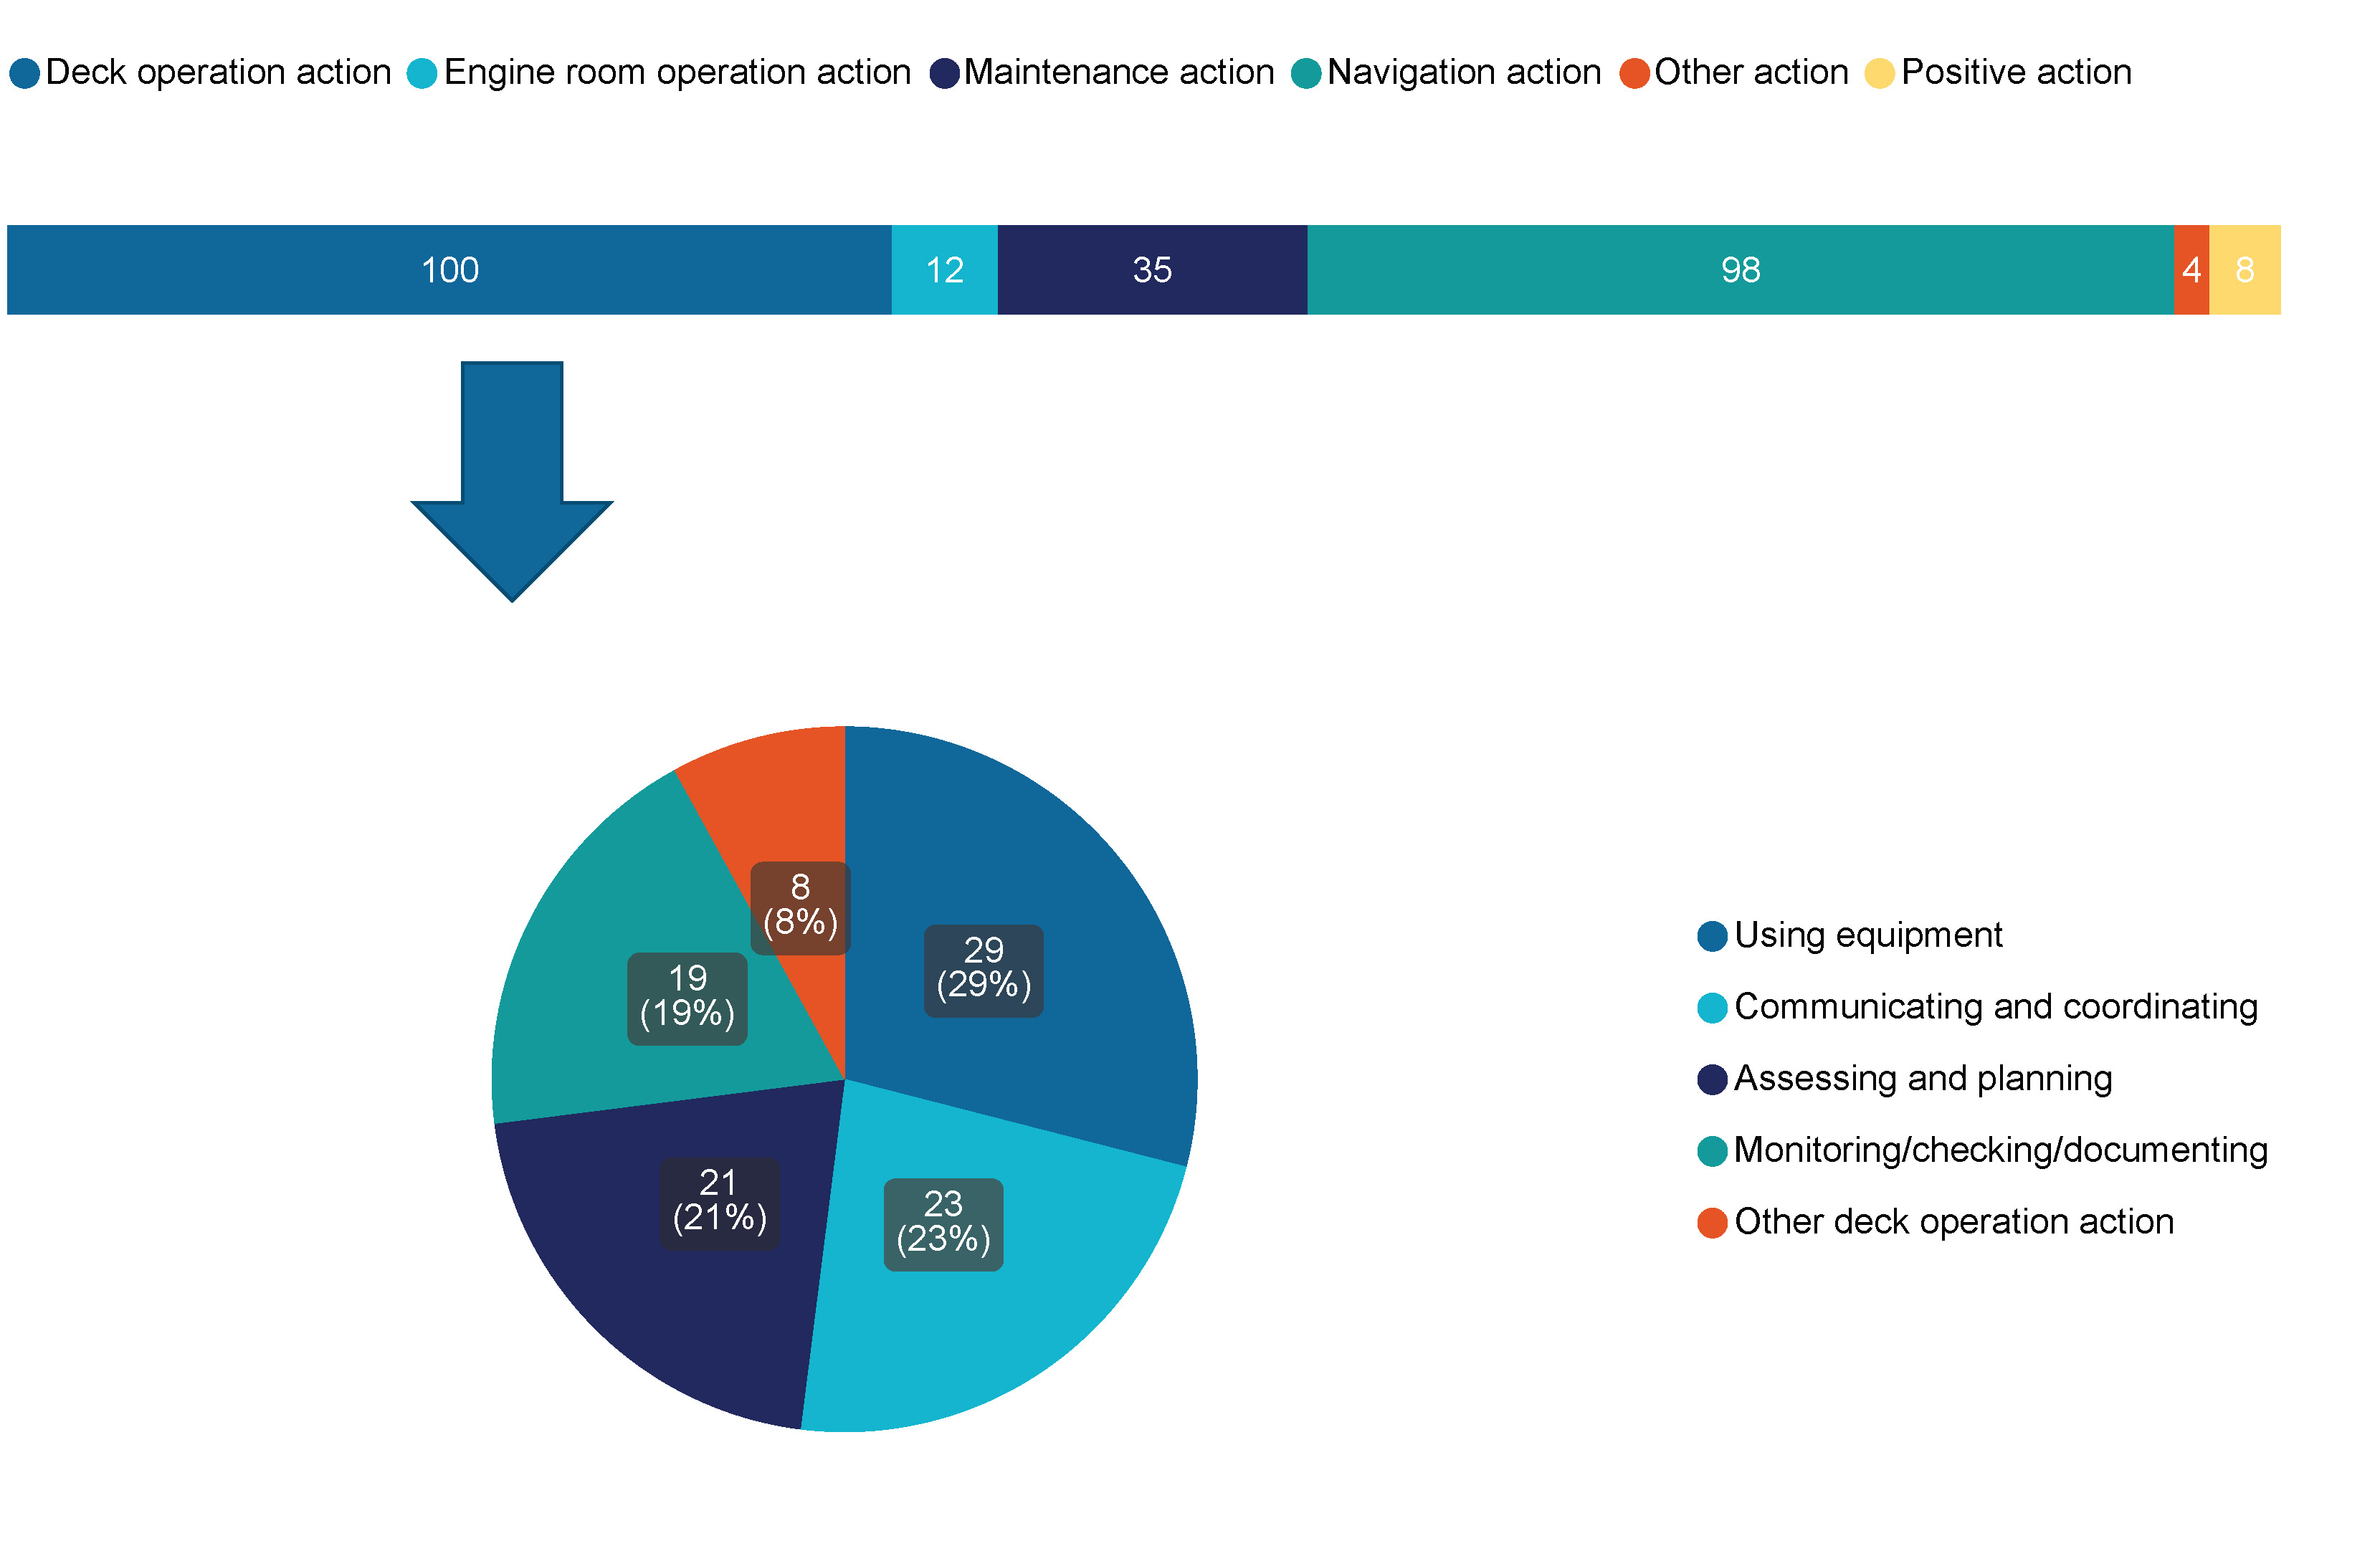 Figure 22 Breakdown of People categories with a focus on deck operations (2020-2023)